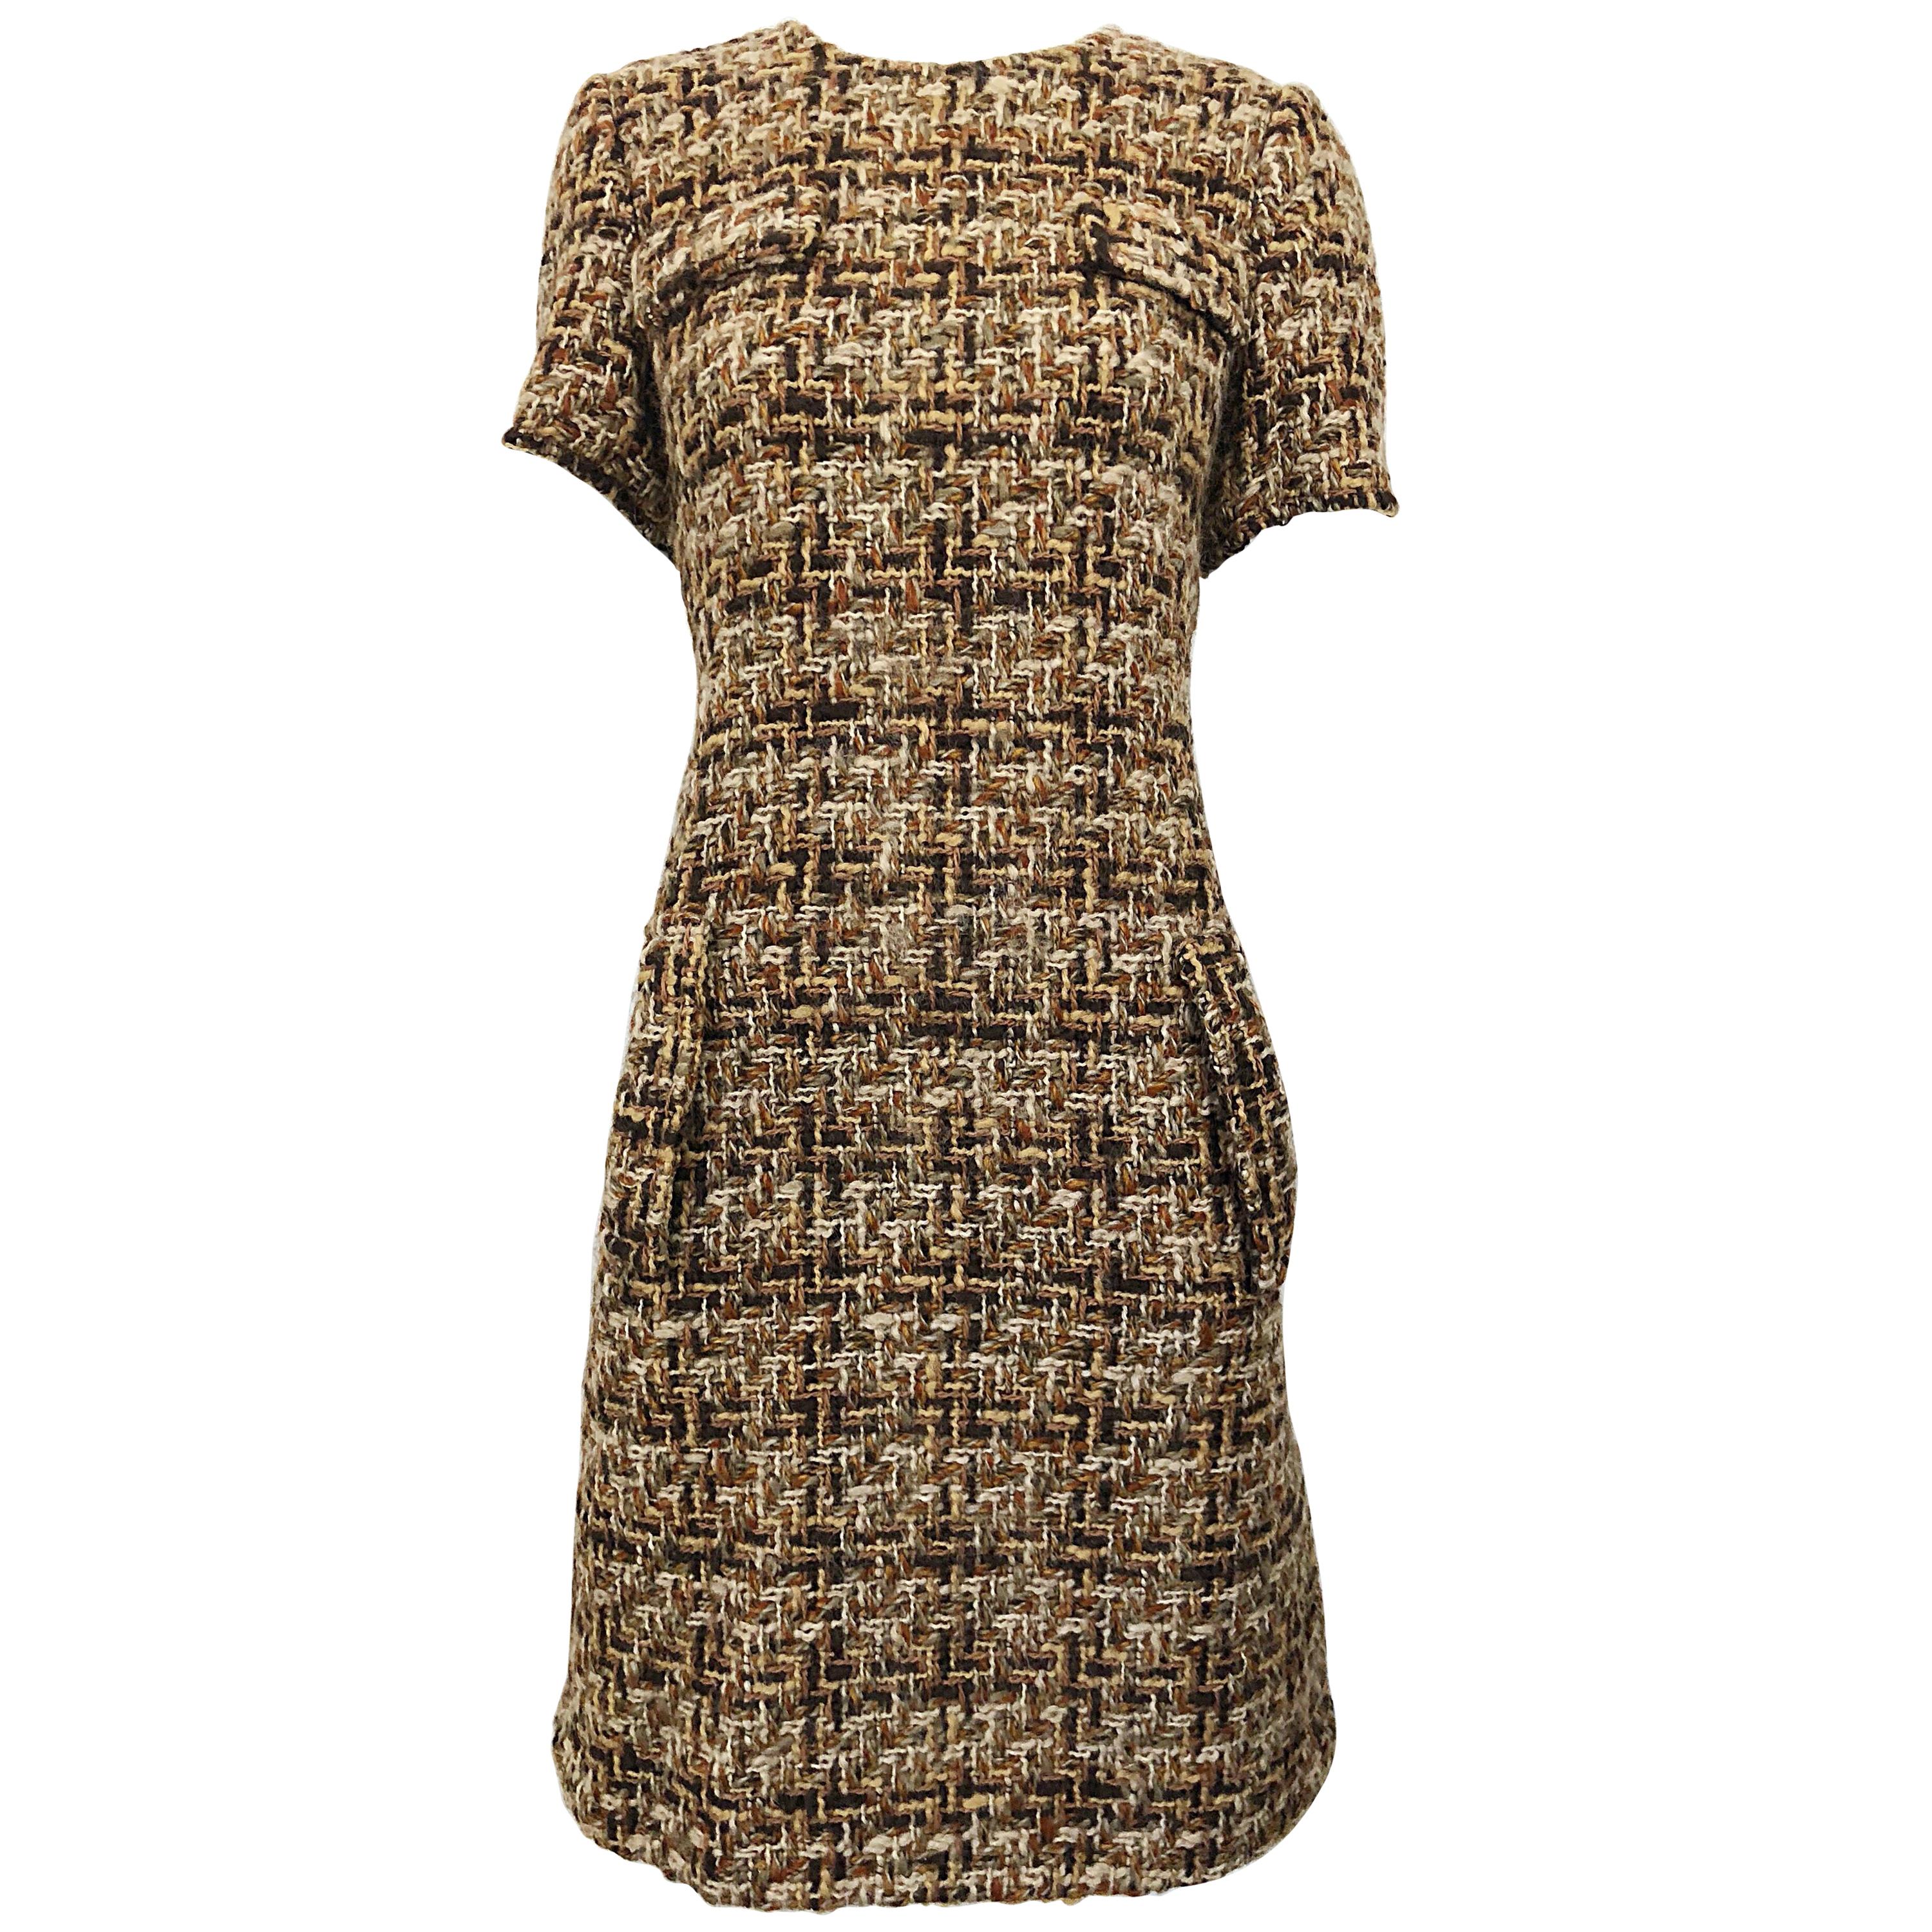 Chic 1960s Brown + Taupe Boucle Woven Short Sleeve Vintage 60s Shift Dress For Sale